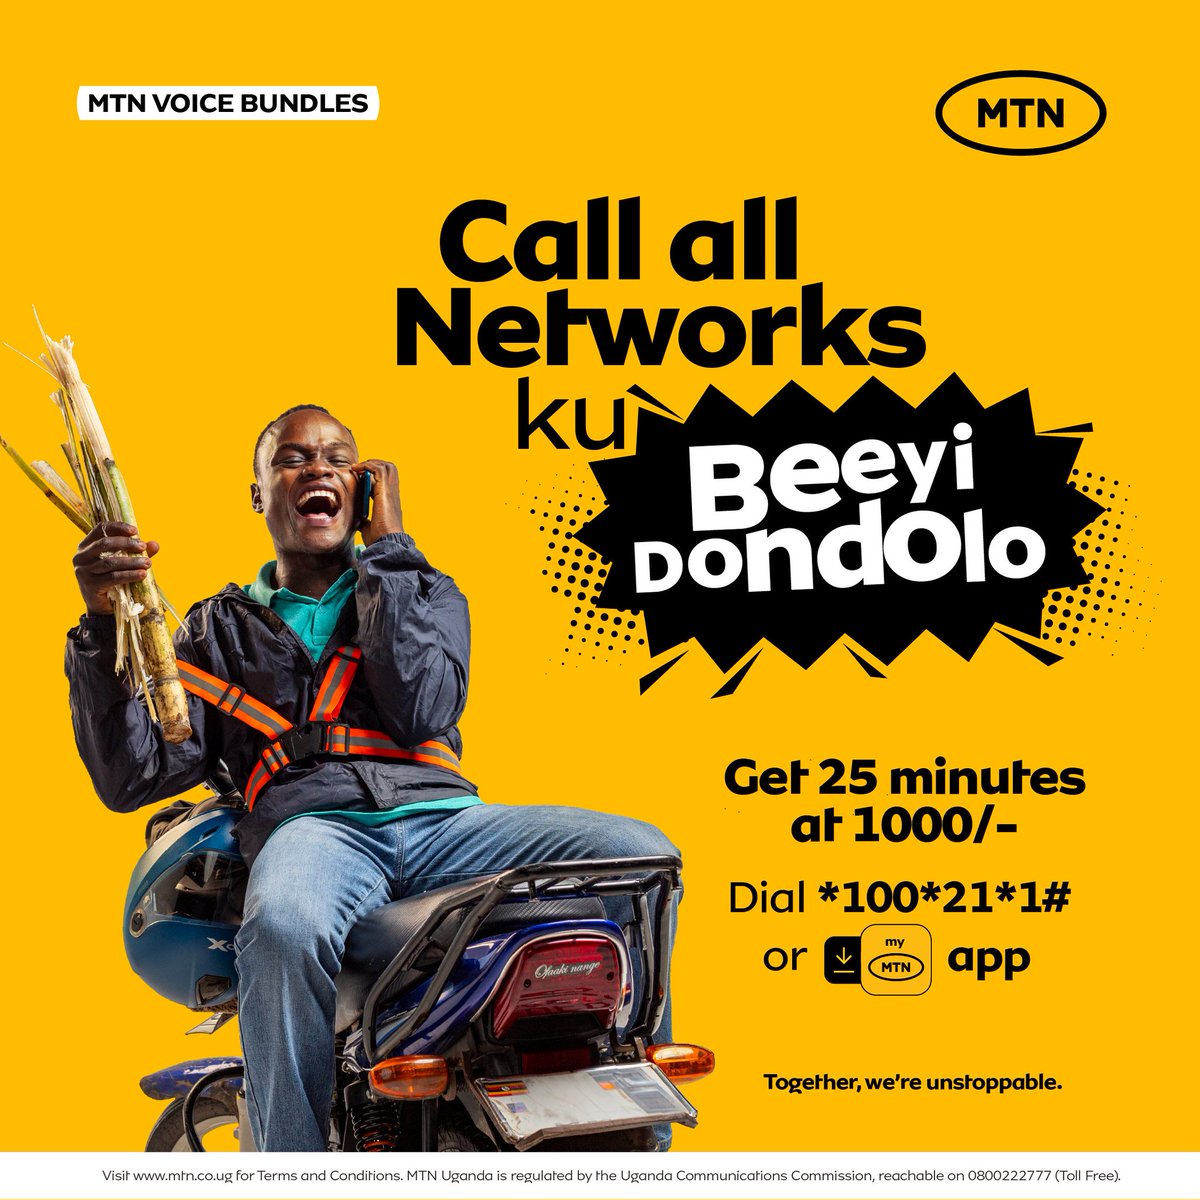 No limit , no restrictions.
Call other networks using your Mtn Simcard ku Beeyi Dondolo.
Use *100*21#ok to activate.
#UnstoppableNetwork #MtnVoiceBundles